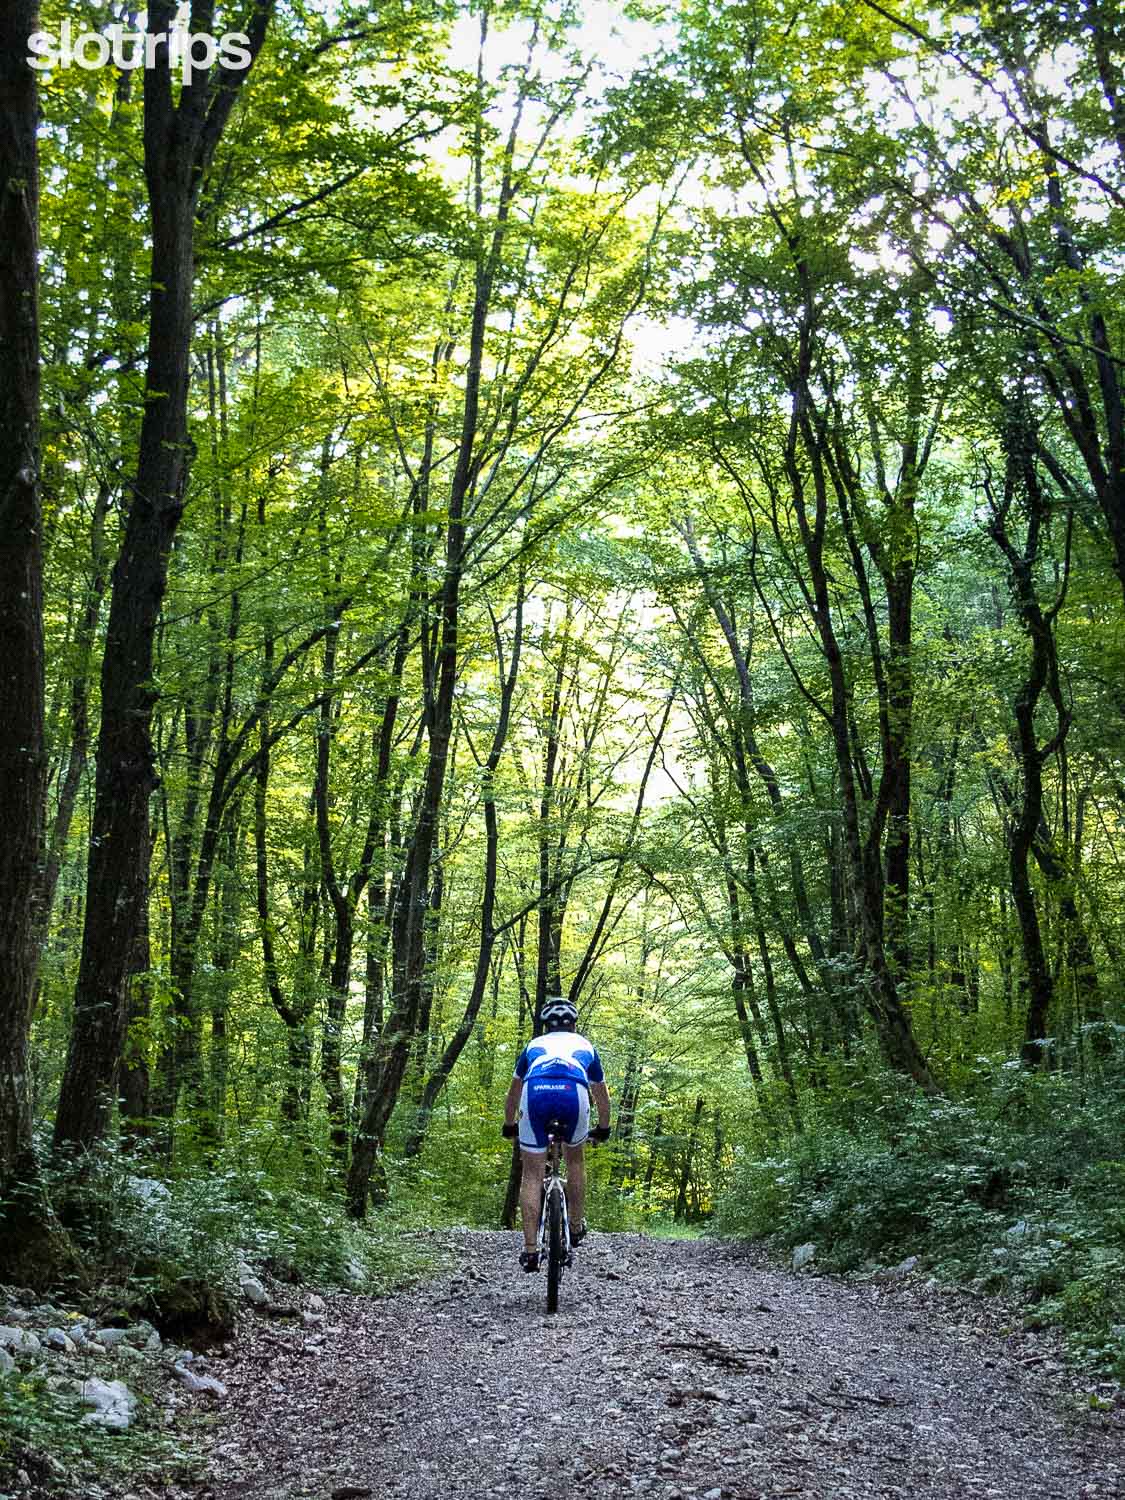 A mountain biker descending on a smooth gravel road through the woods in Slovenia